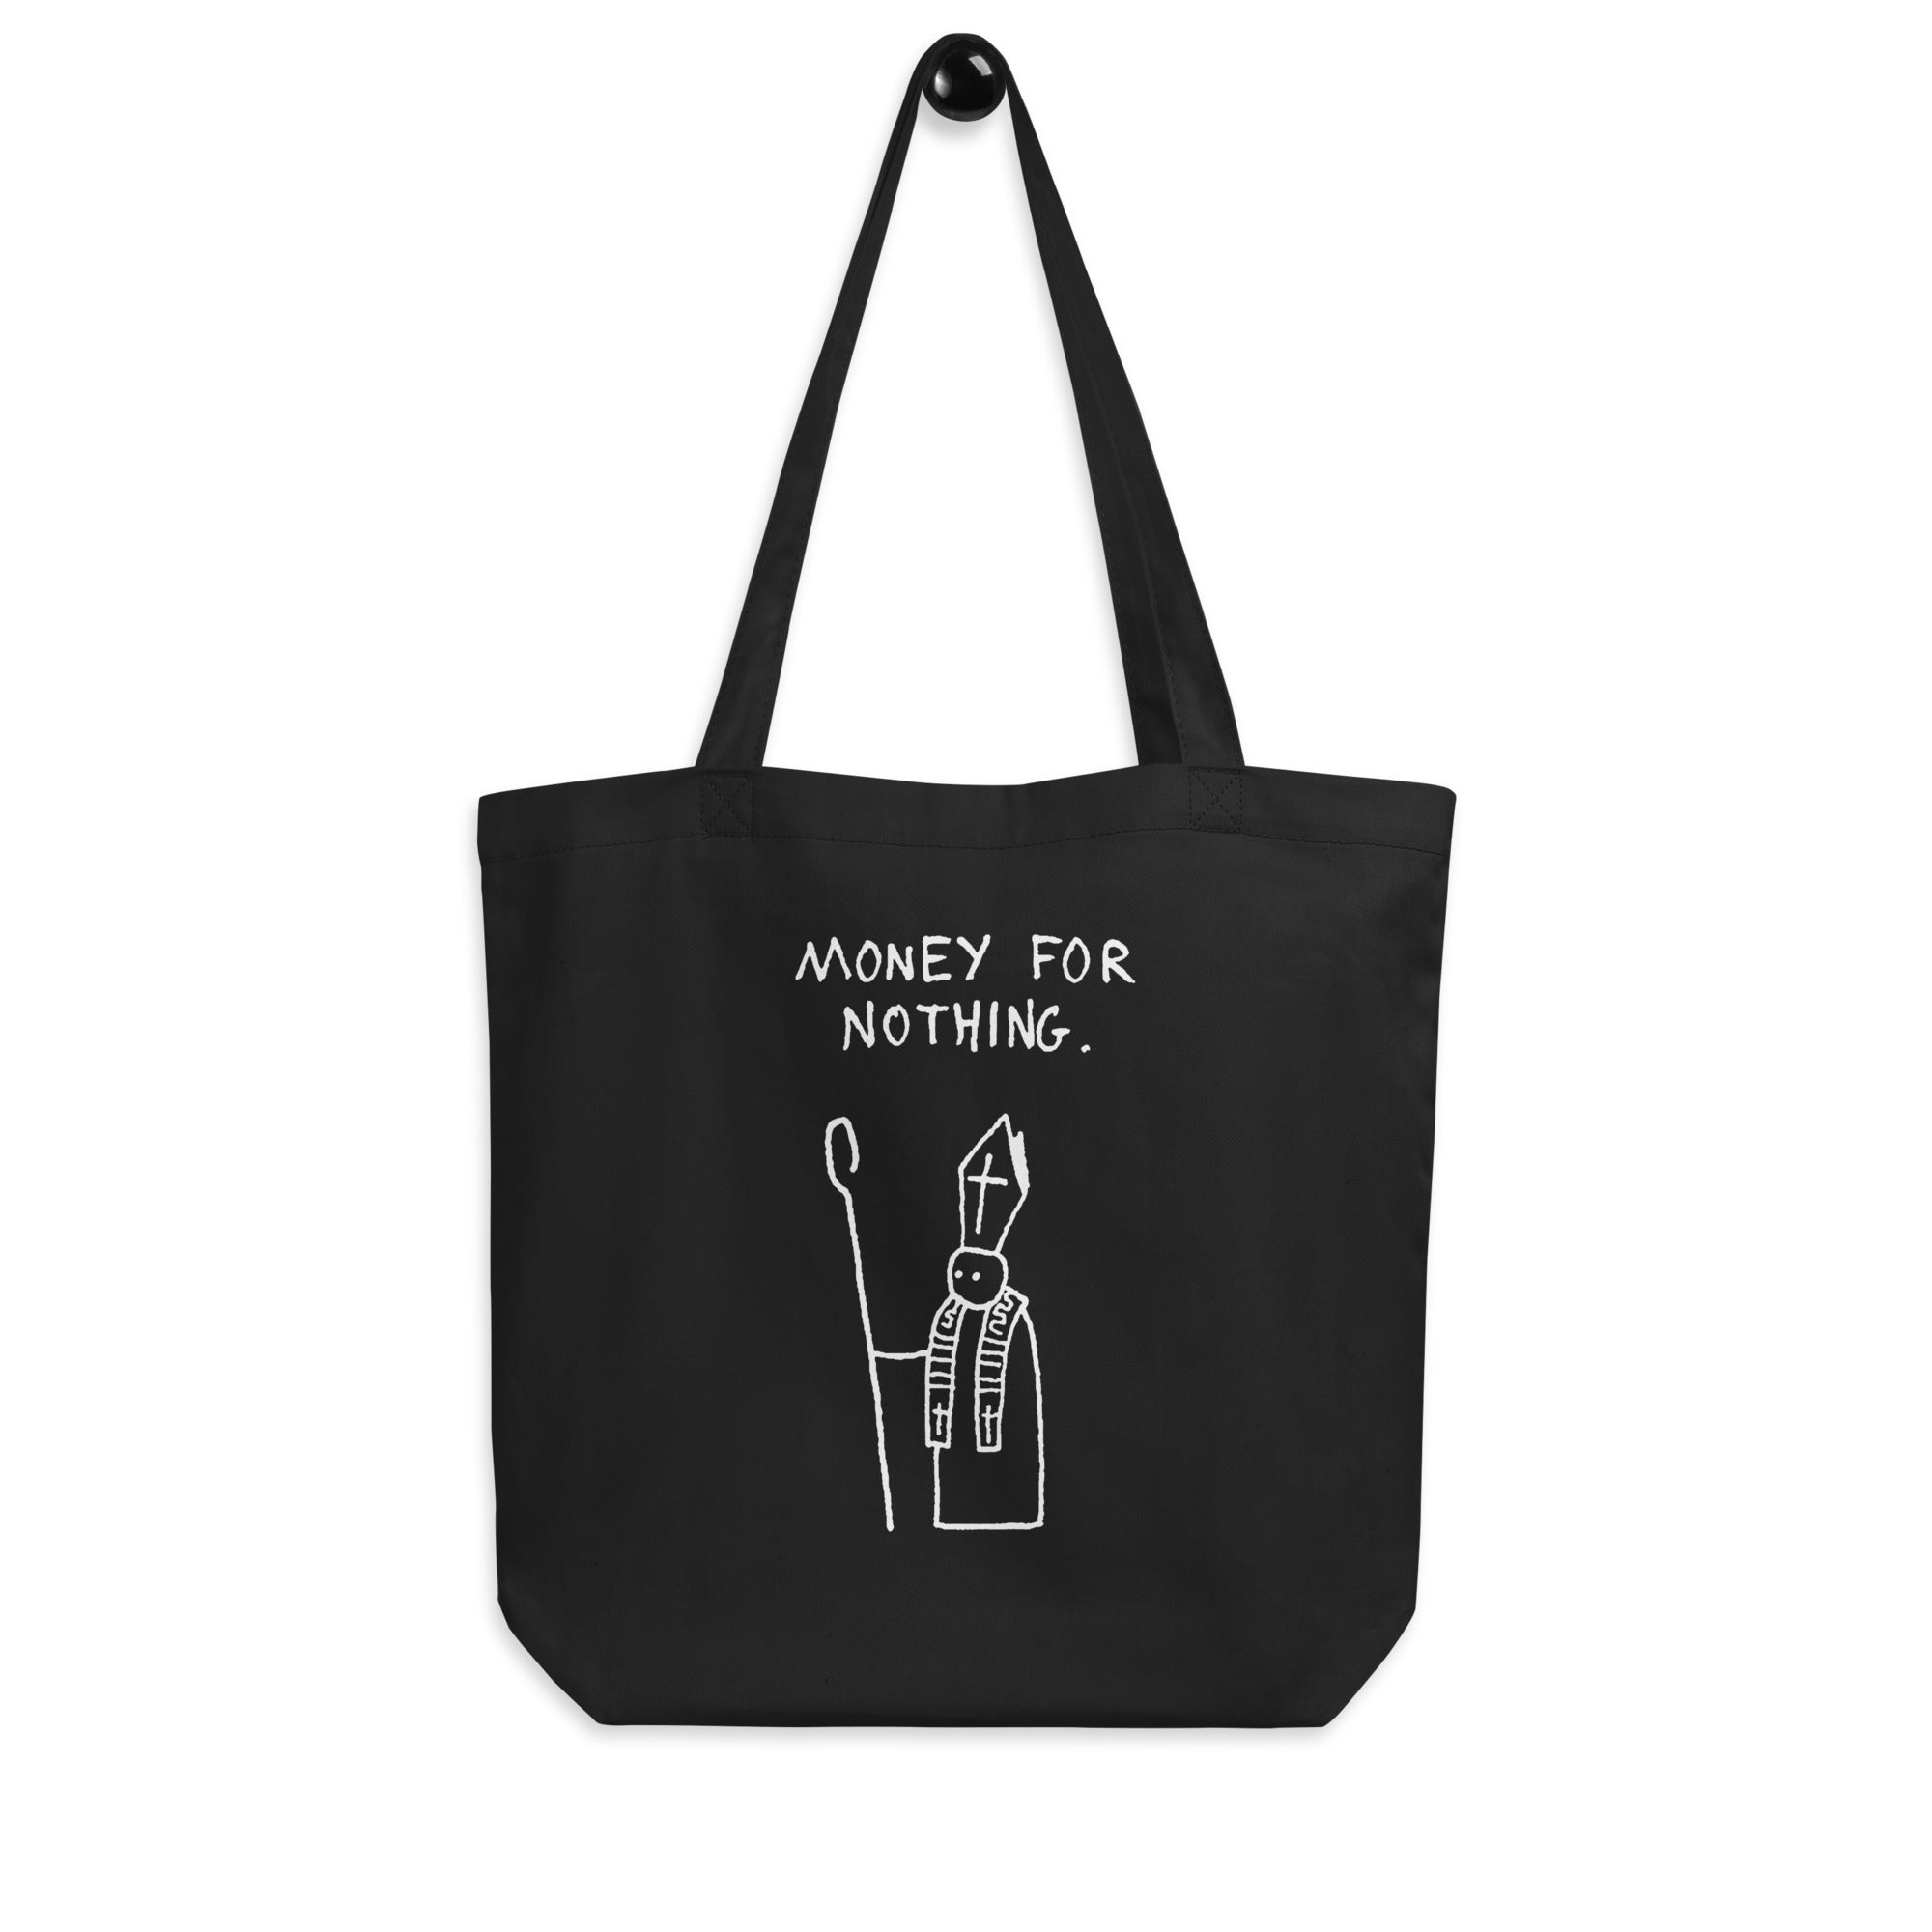 Money for nothing - Tote Bag